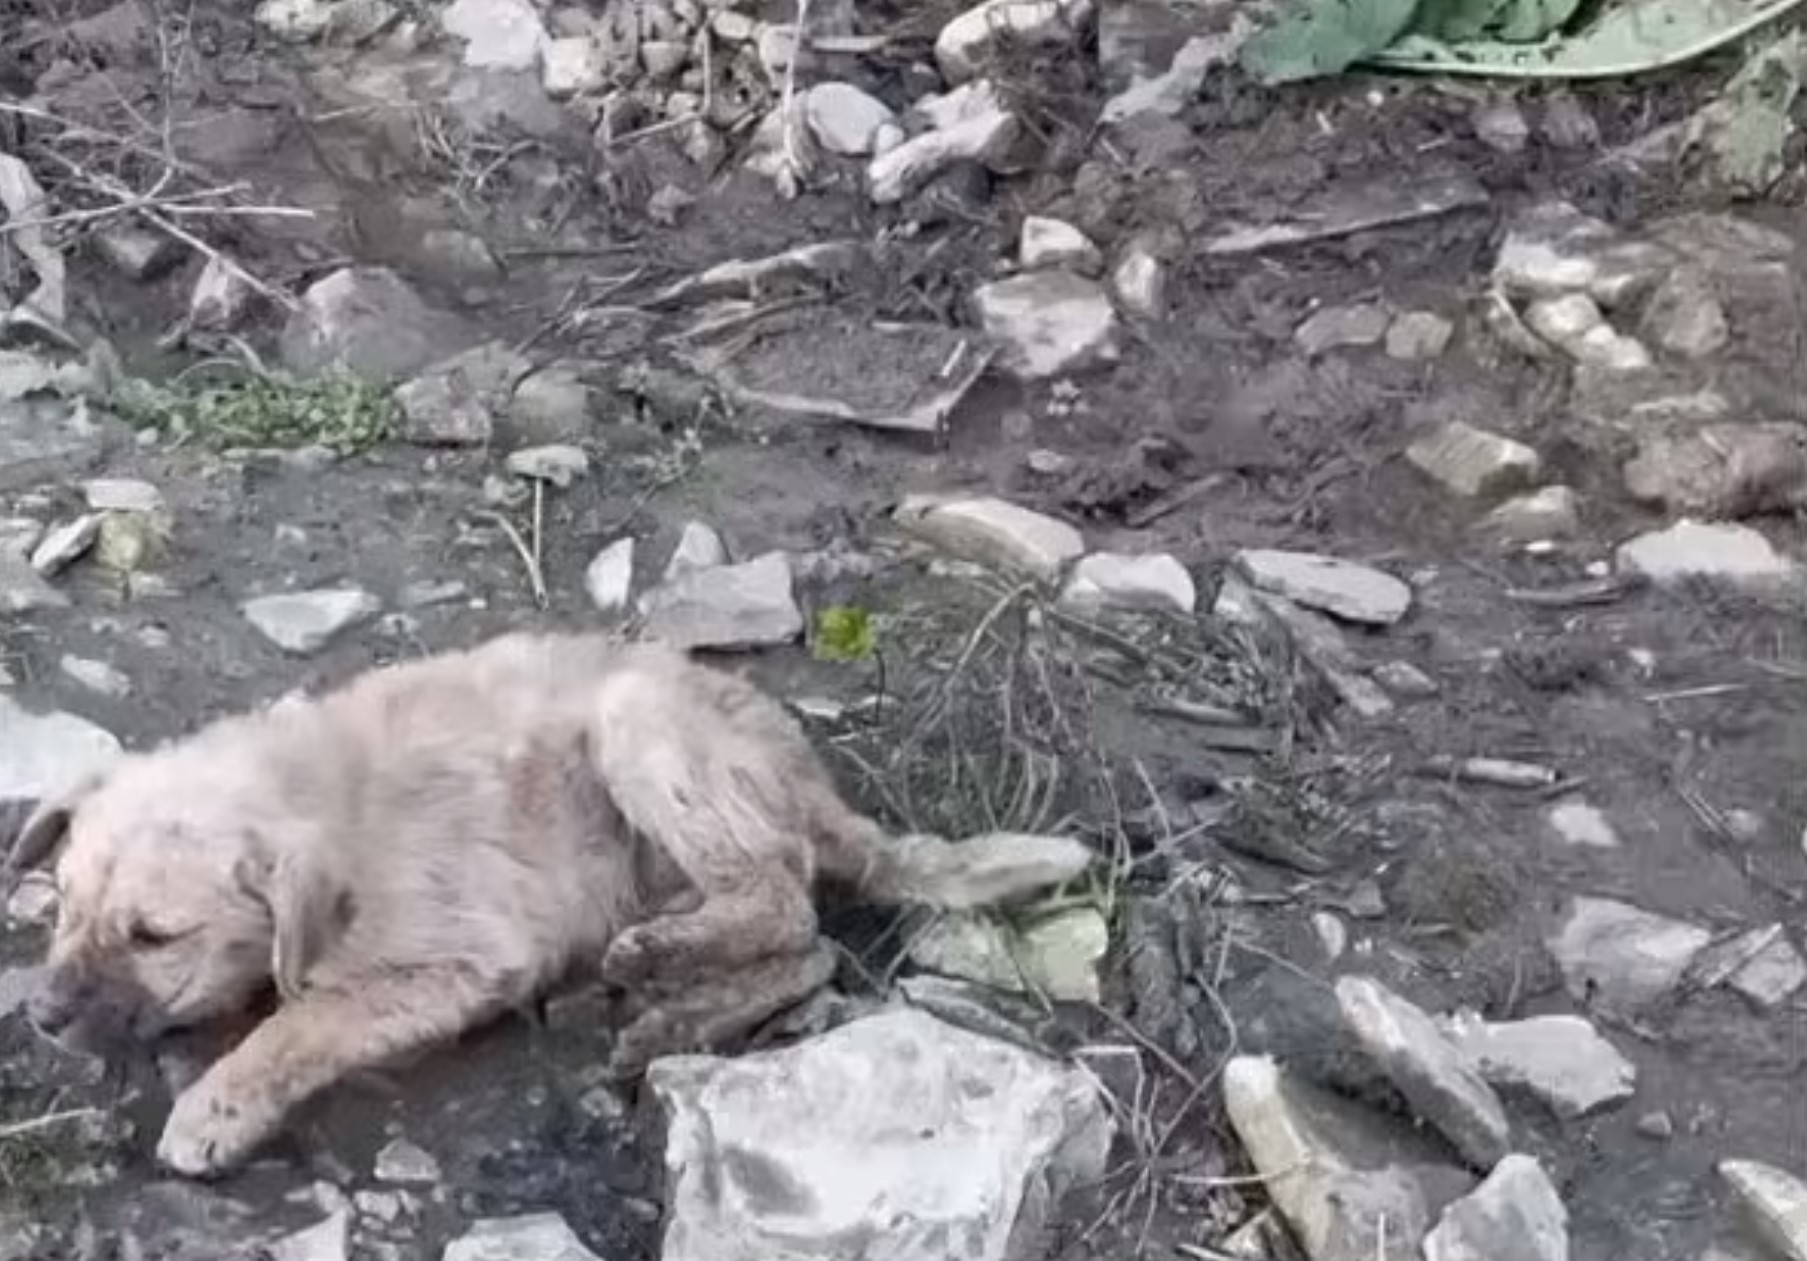 stranded dog on a mountain